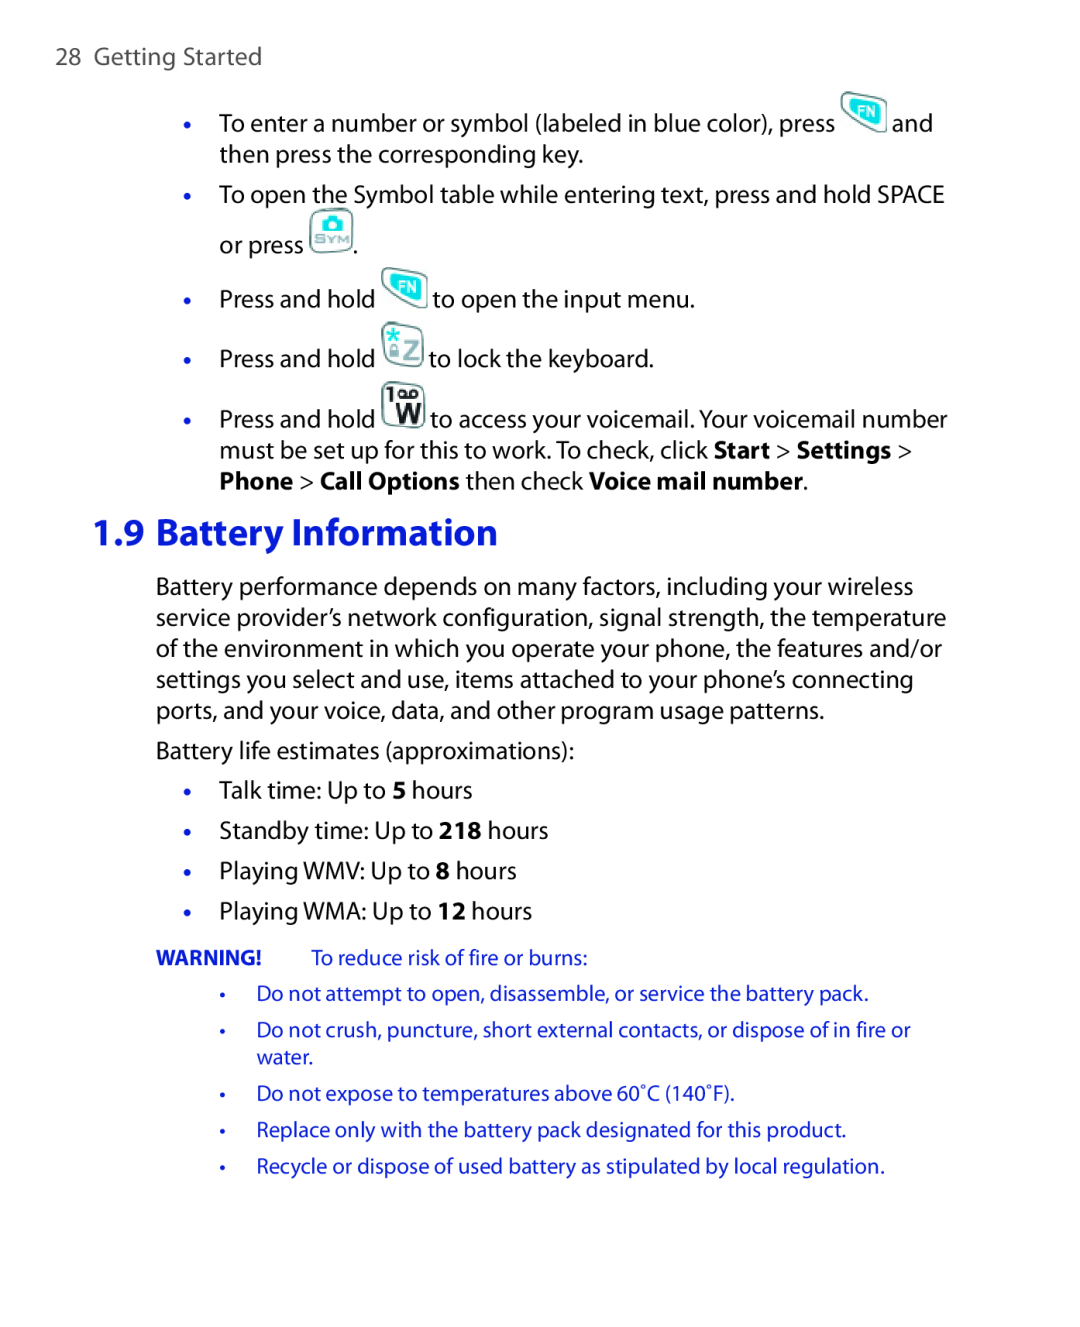 HTC HTC S621 user manual Battery Information, Getting Started, WARNING! To reduce risk of fire or burns 